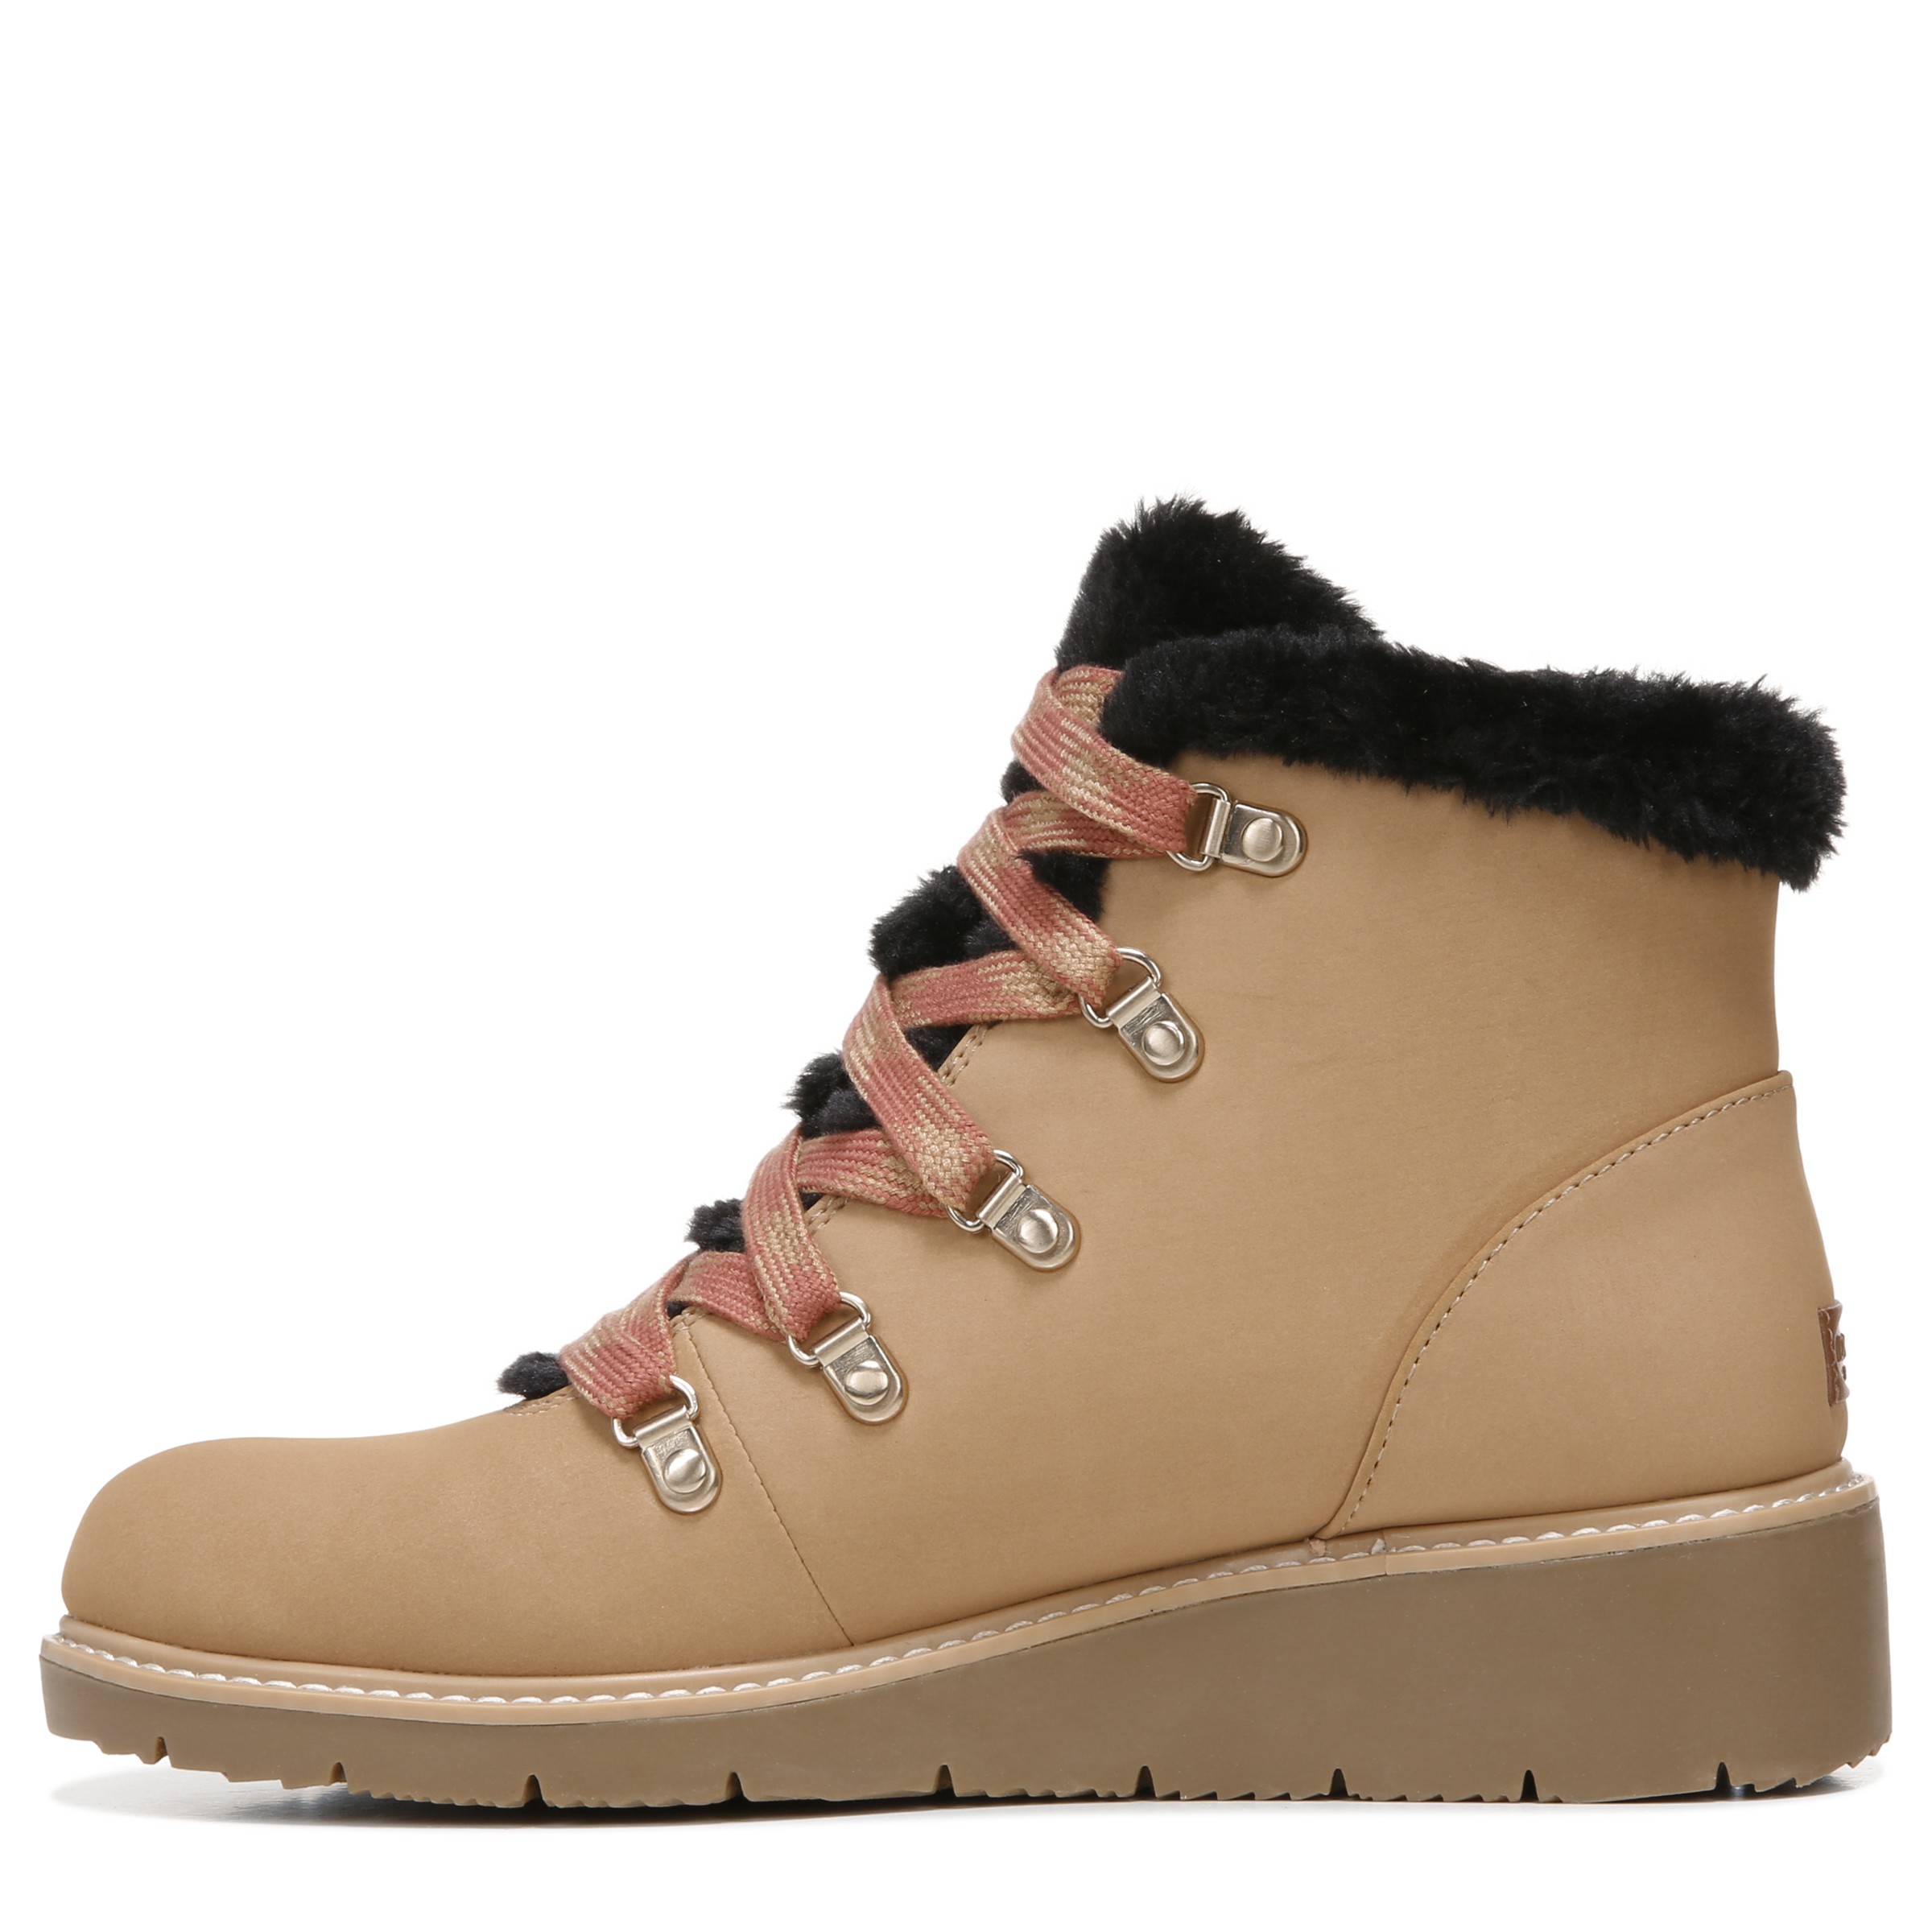 Details about   45/46/47 Women's Thick Sole Square Toe Comfort Smart Work Lace Ups Ankle Boots L 